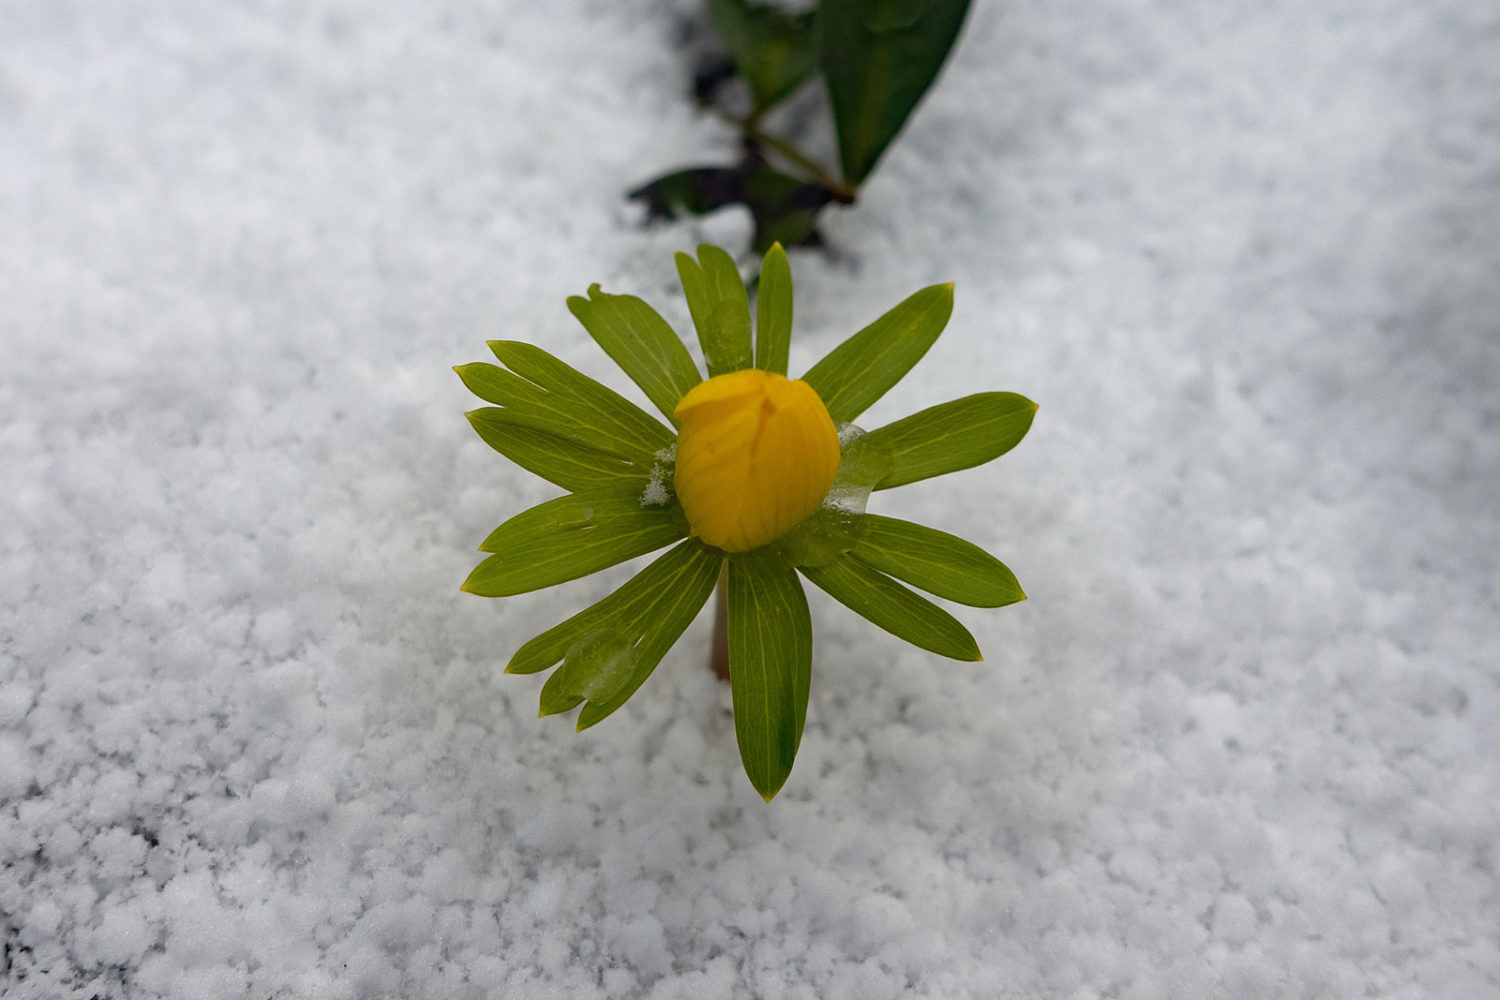 Winter Aconite in snow out back 2022